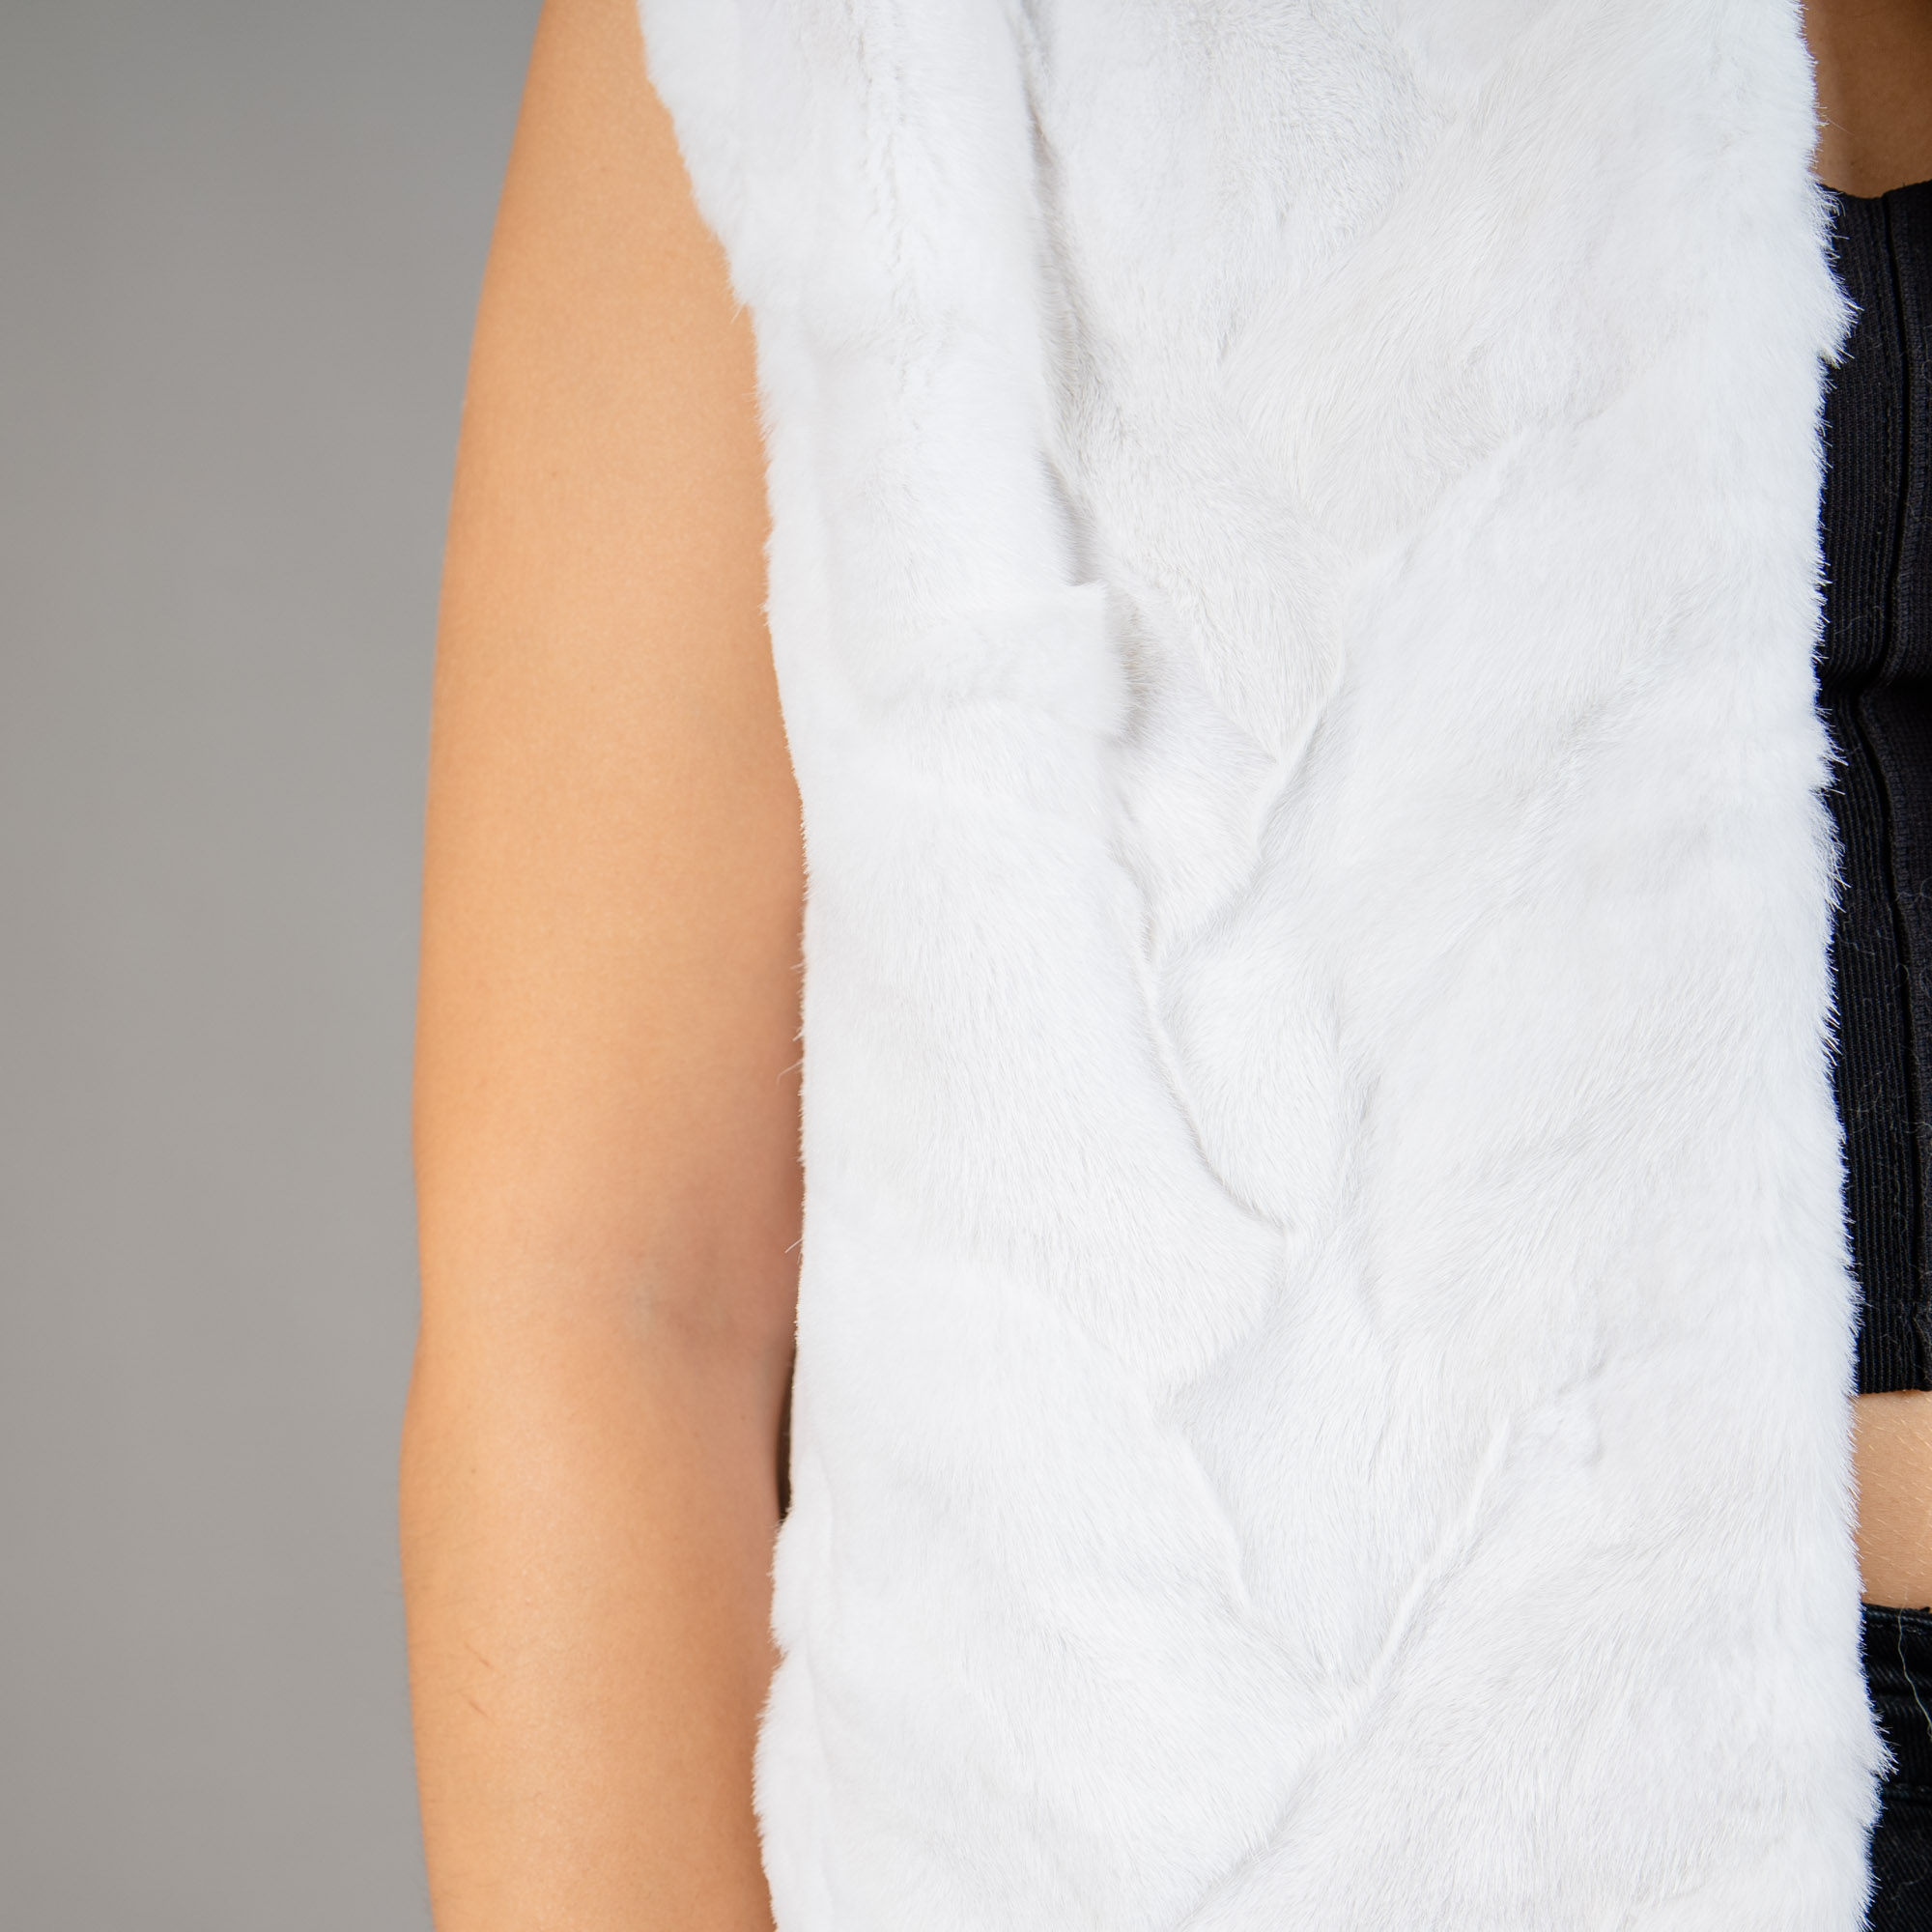 White fox fur vest with a collar. 